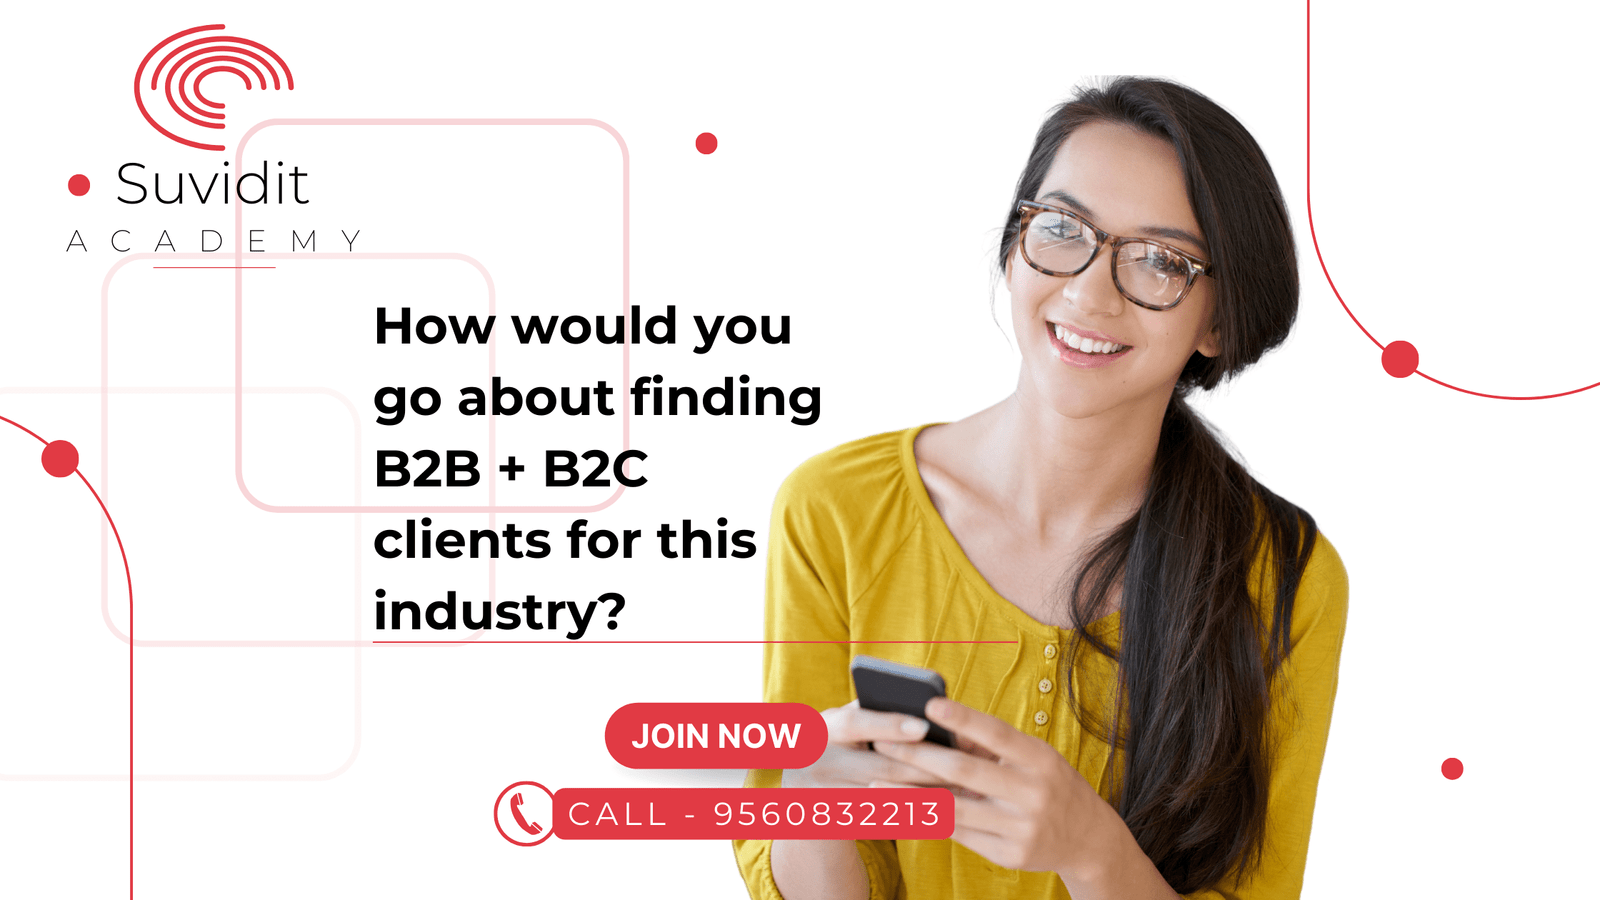 How would you go about finding B2B + B2C clients for this industry